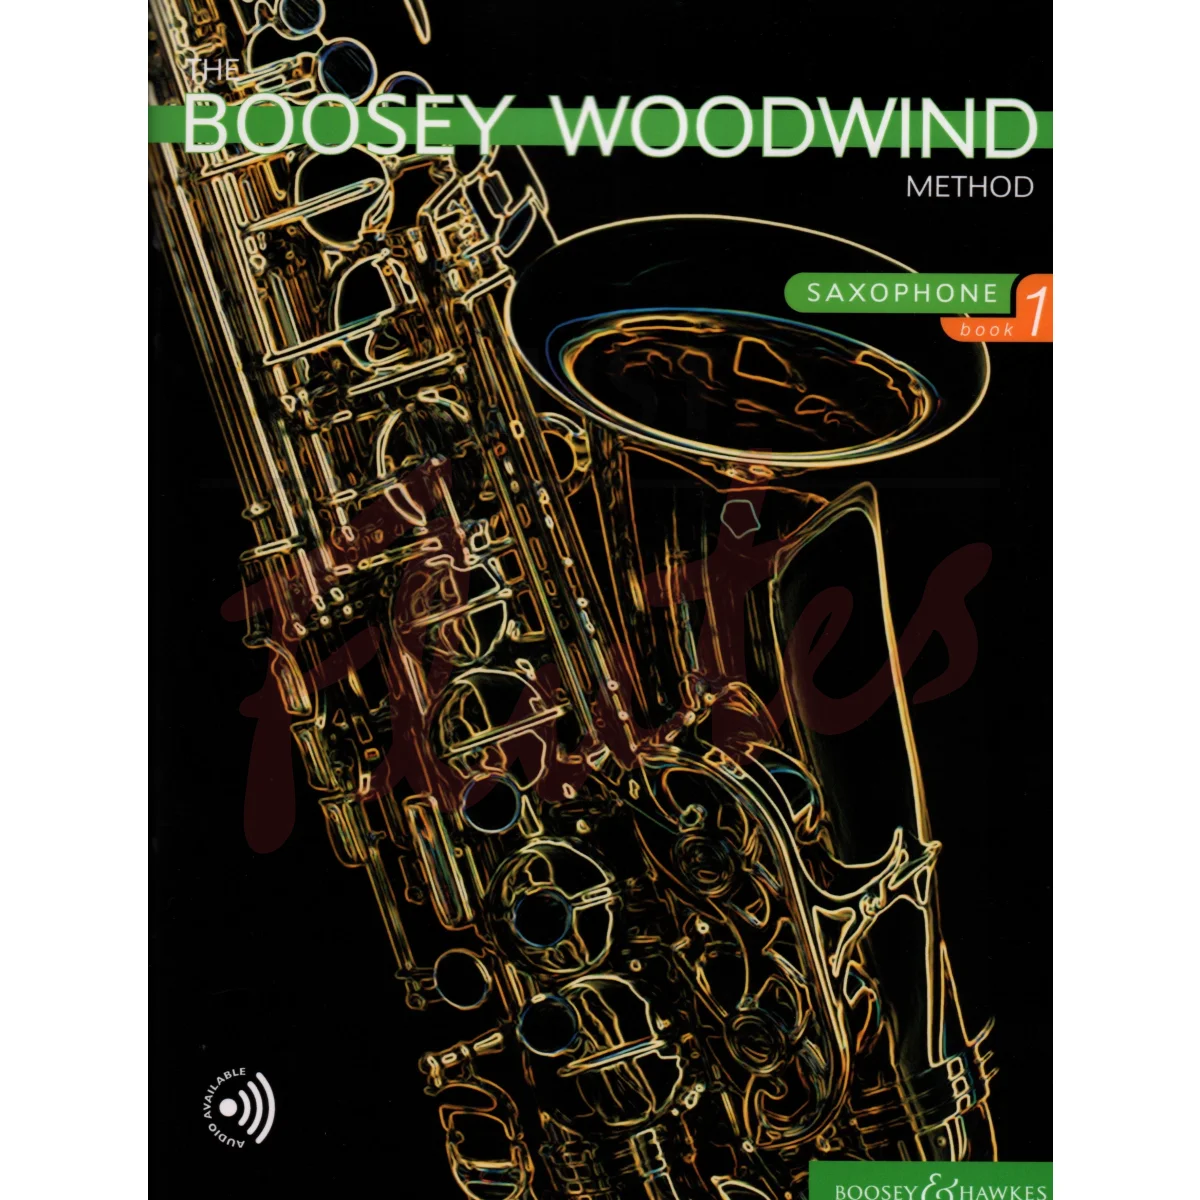 The Boosey Woodwind Method for Alto Saxophone, Book 1